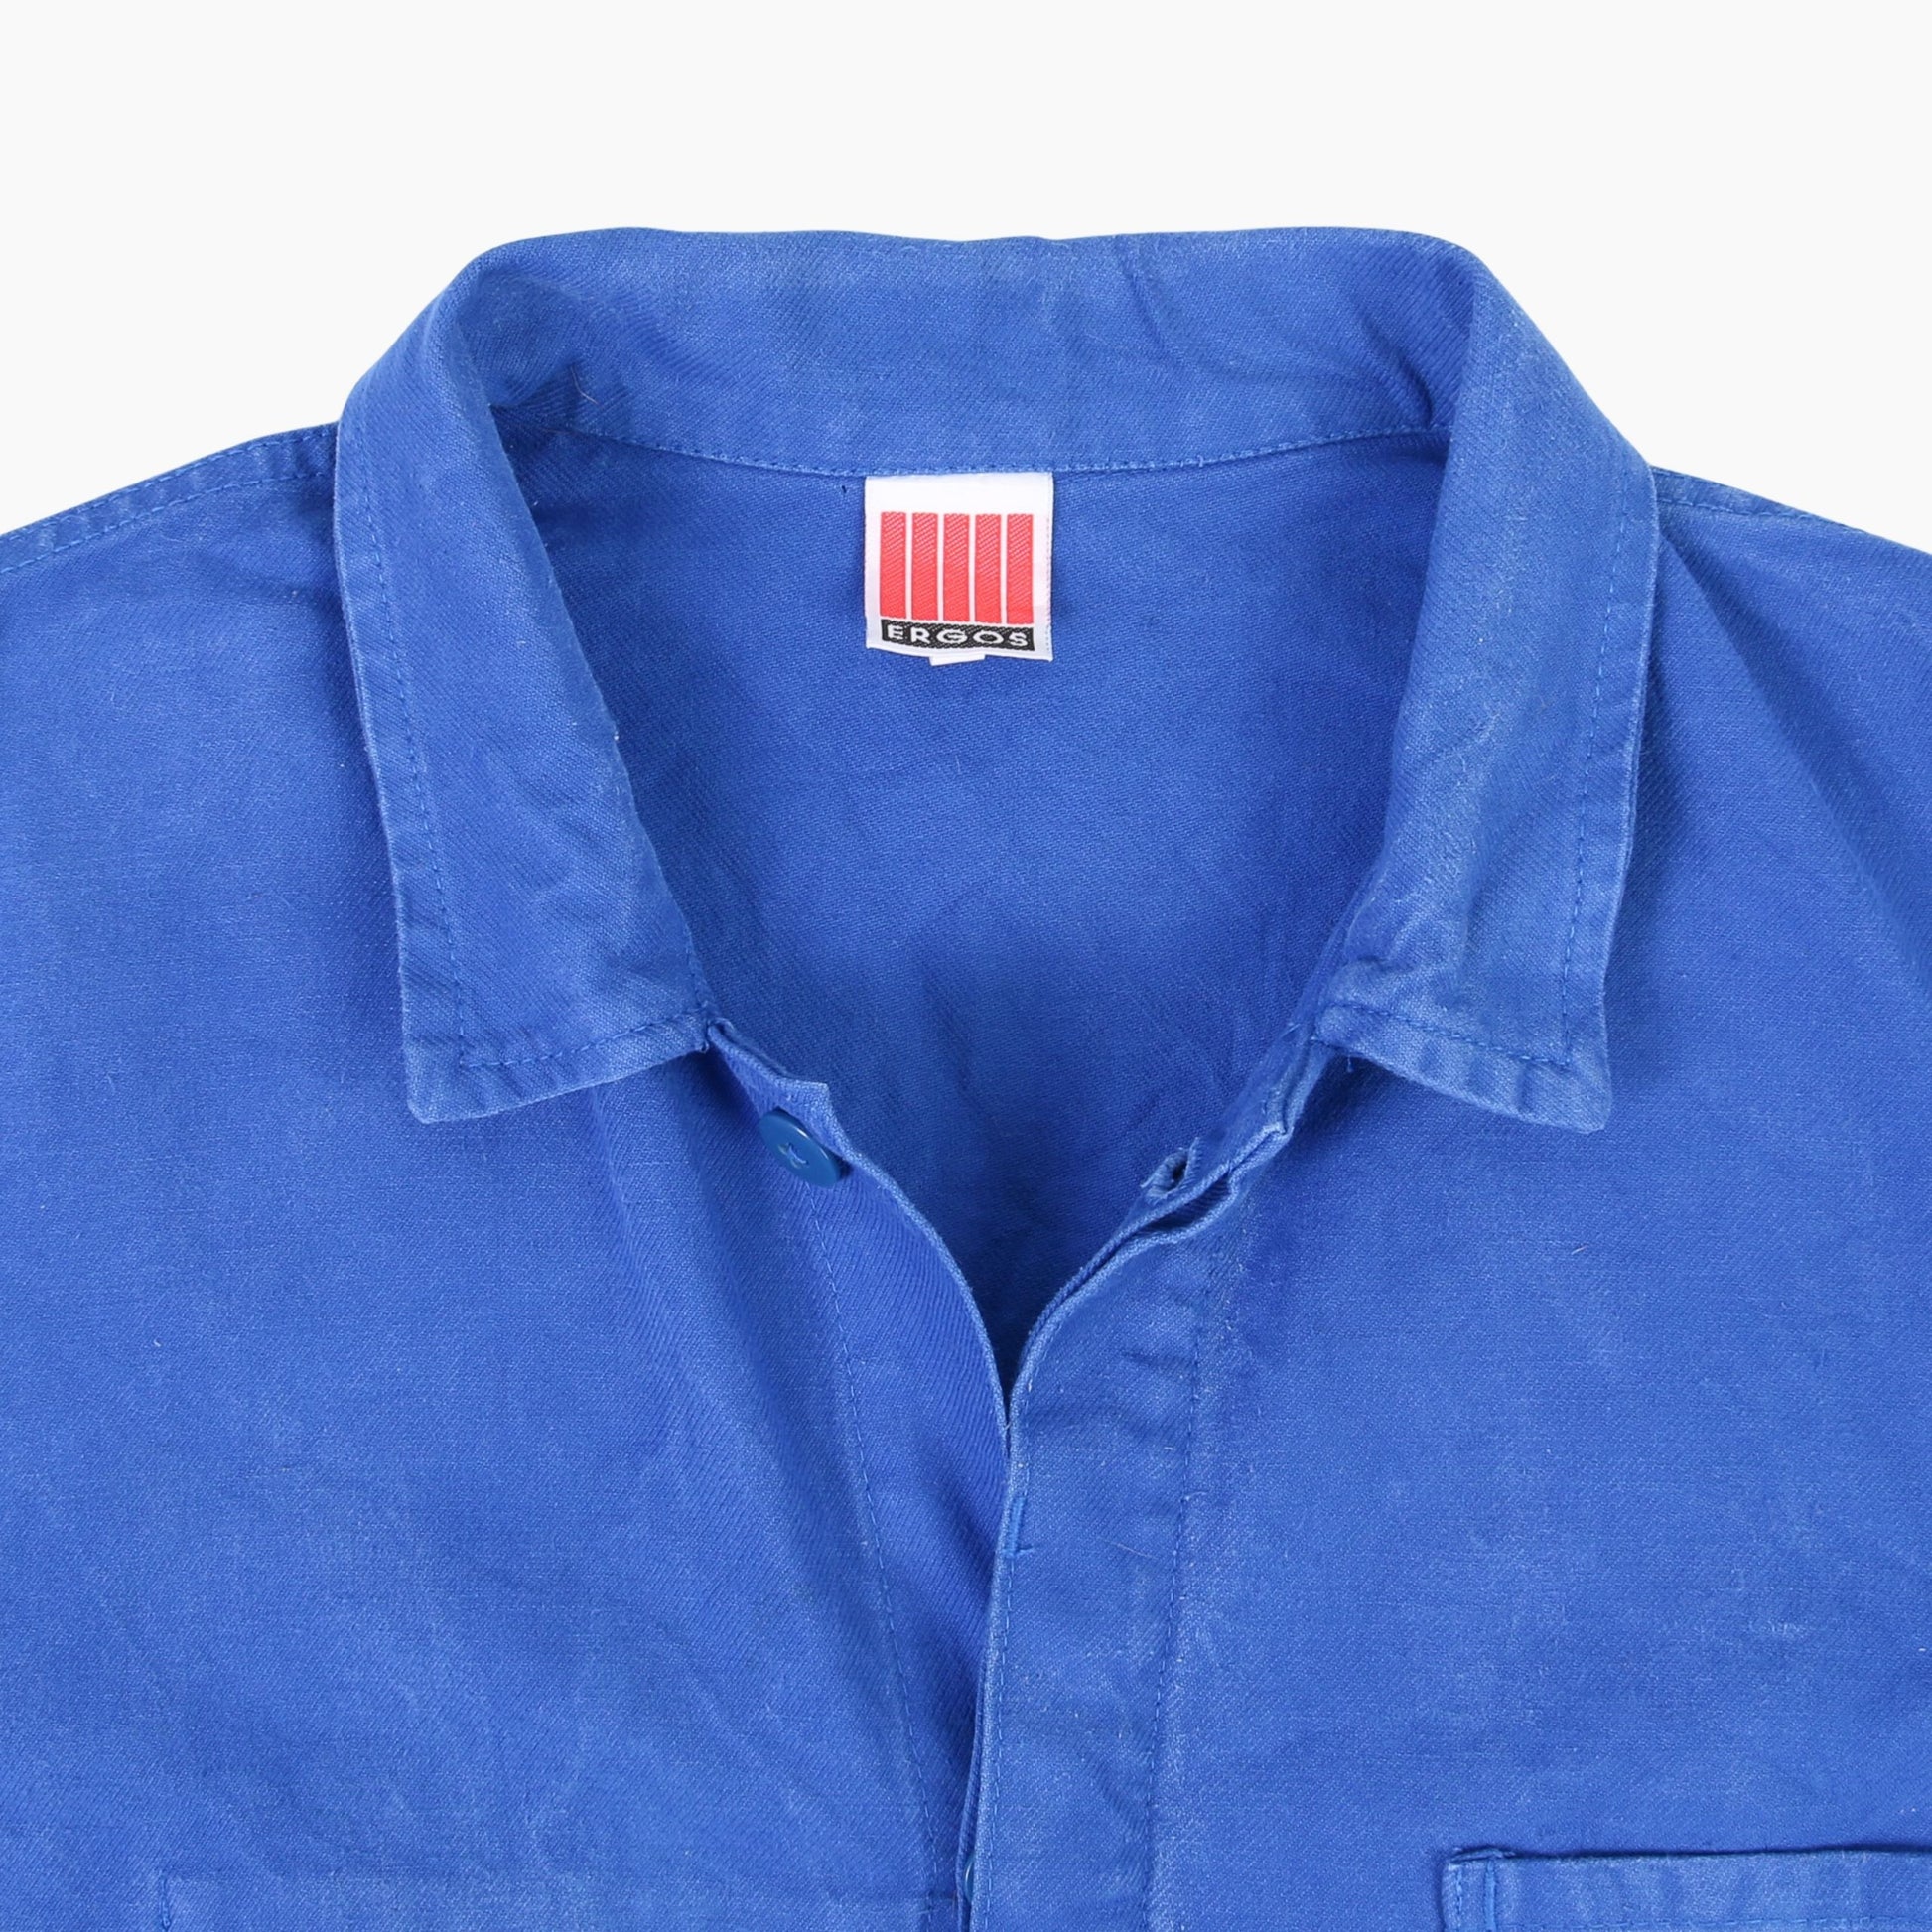 Vintage French Chore Jacket - American Madness